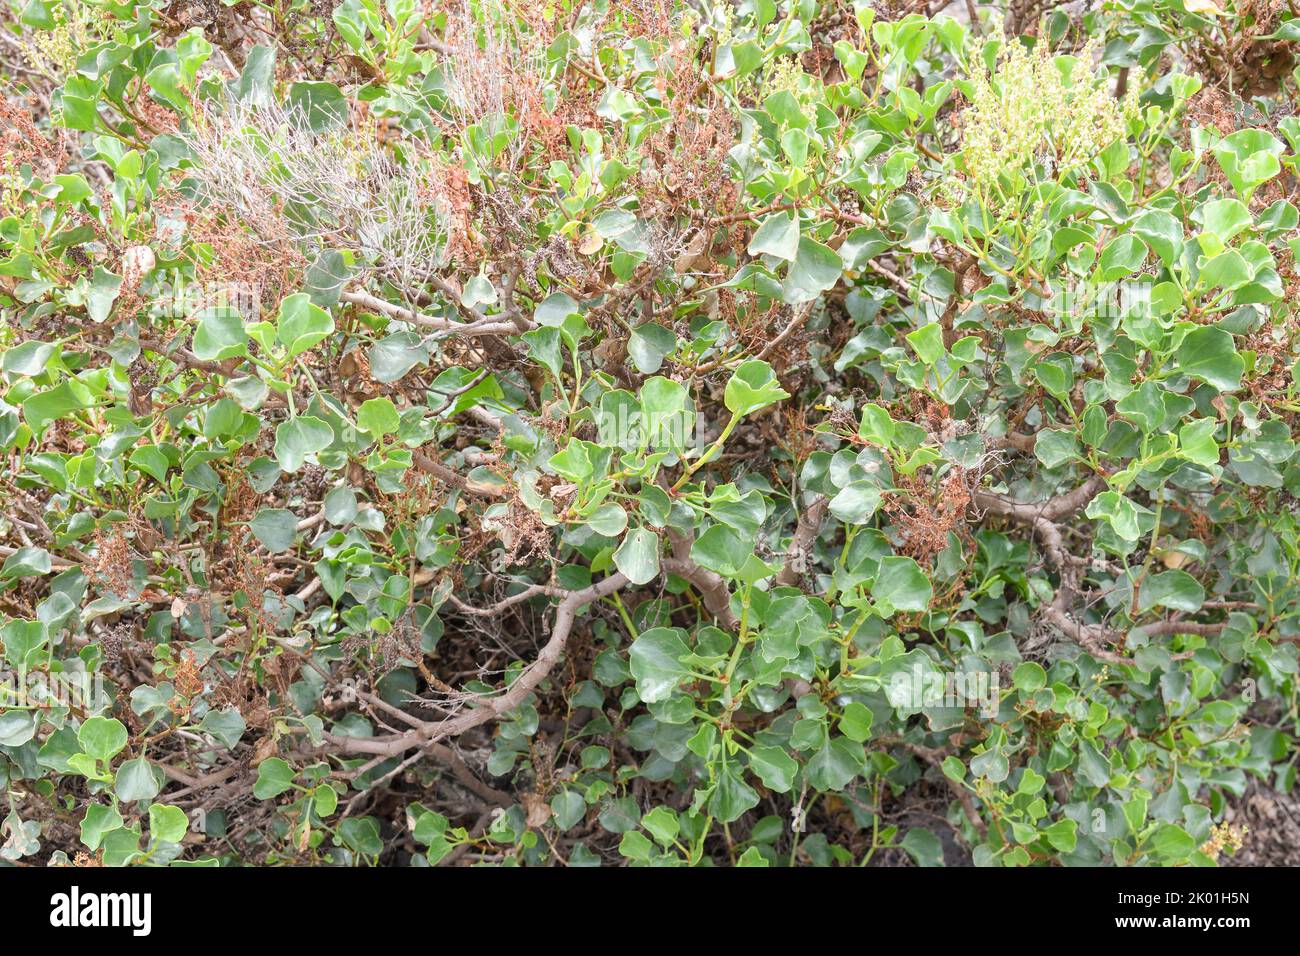 Specimen of Rumex lunaria growing among the lava of the island of Lanzarote Stock Photo